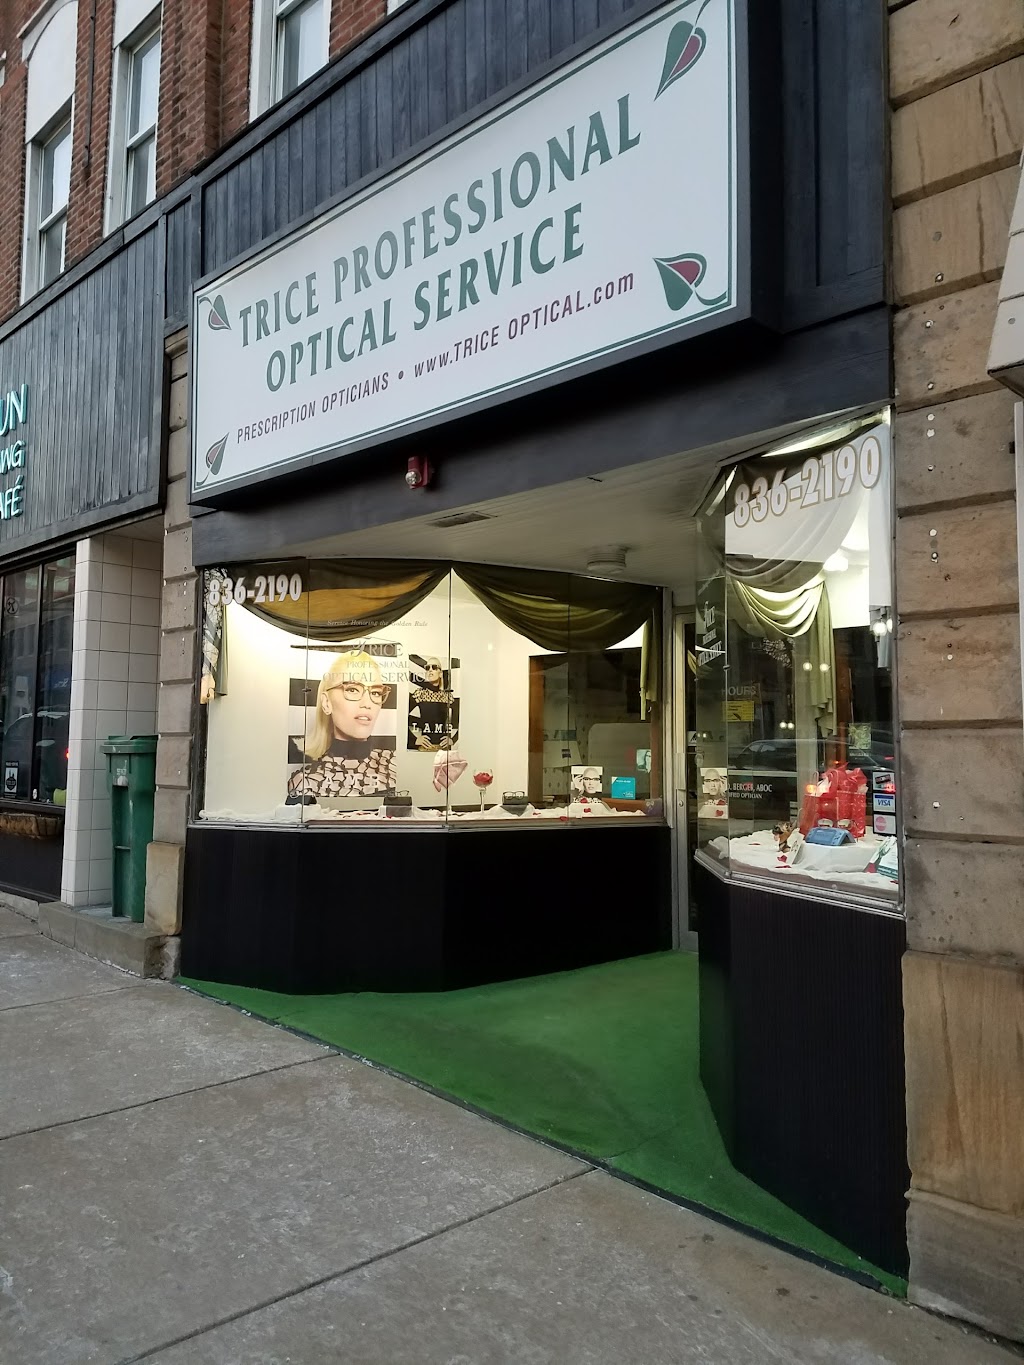 Trice Professional Optical Service | Route 30, 225 Margaret Ave, Jeannette, PA 15644 | Phone: (724) 836-2190